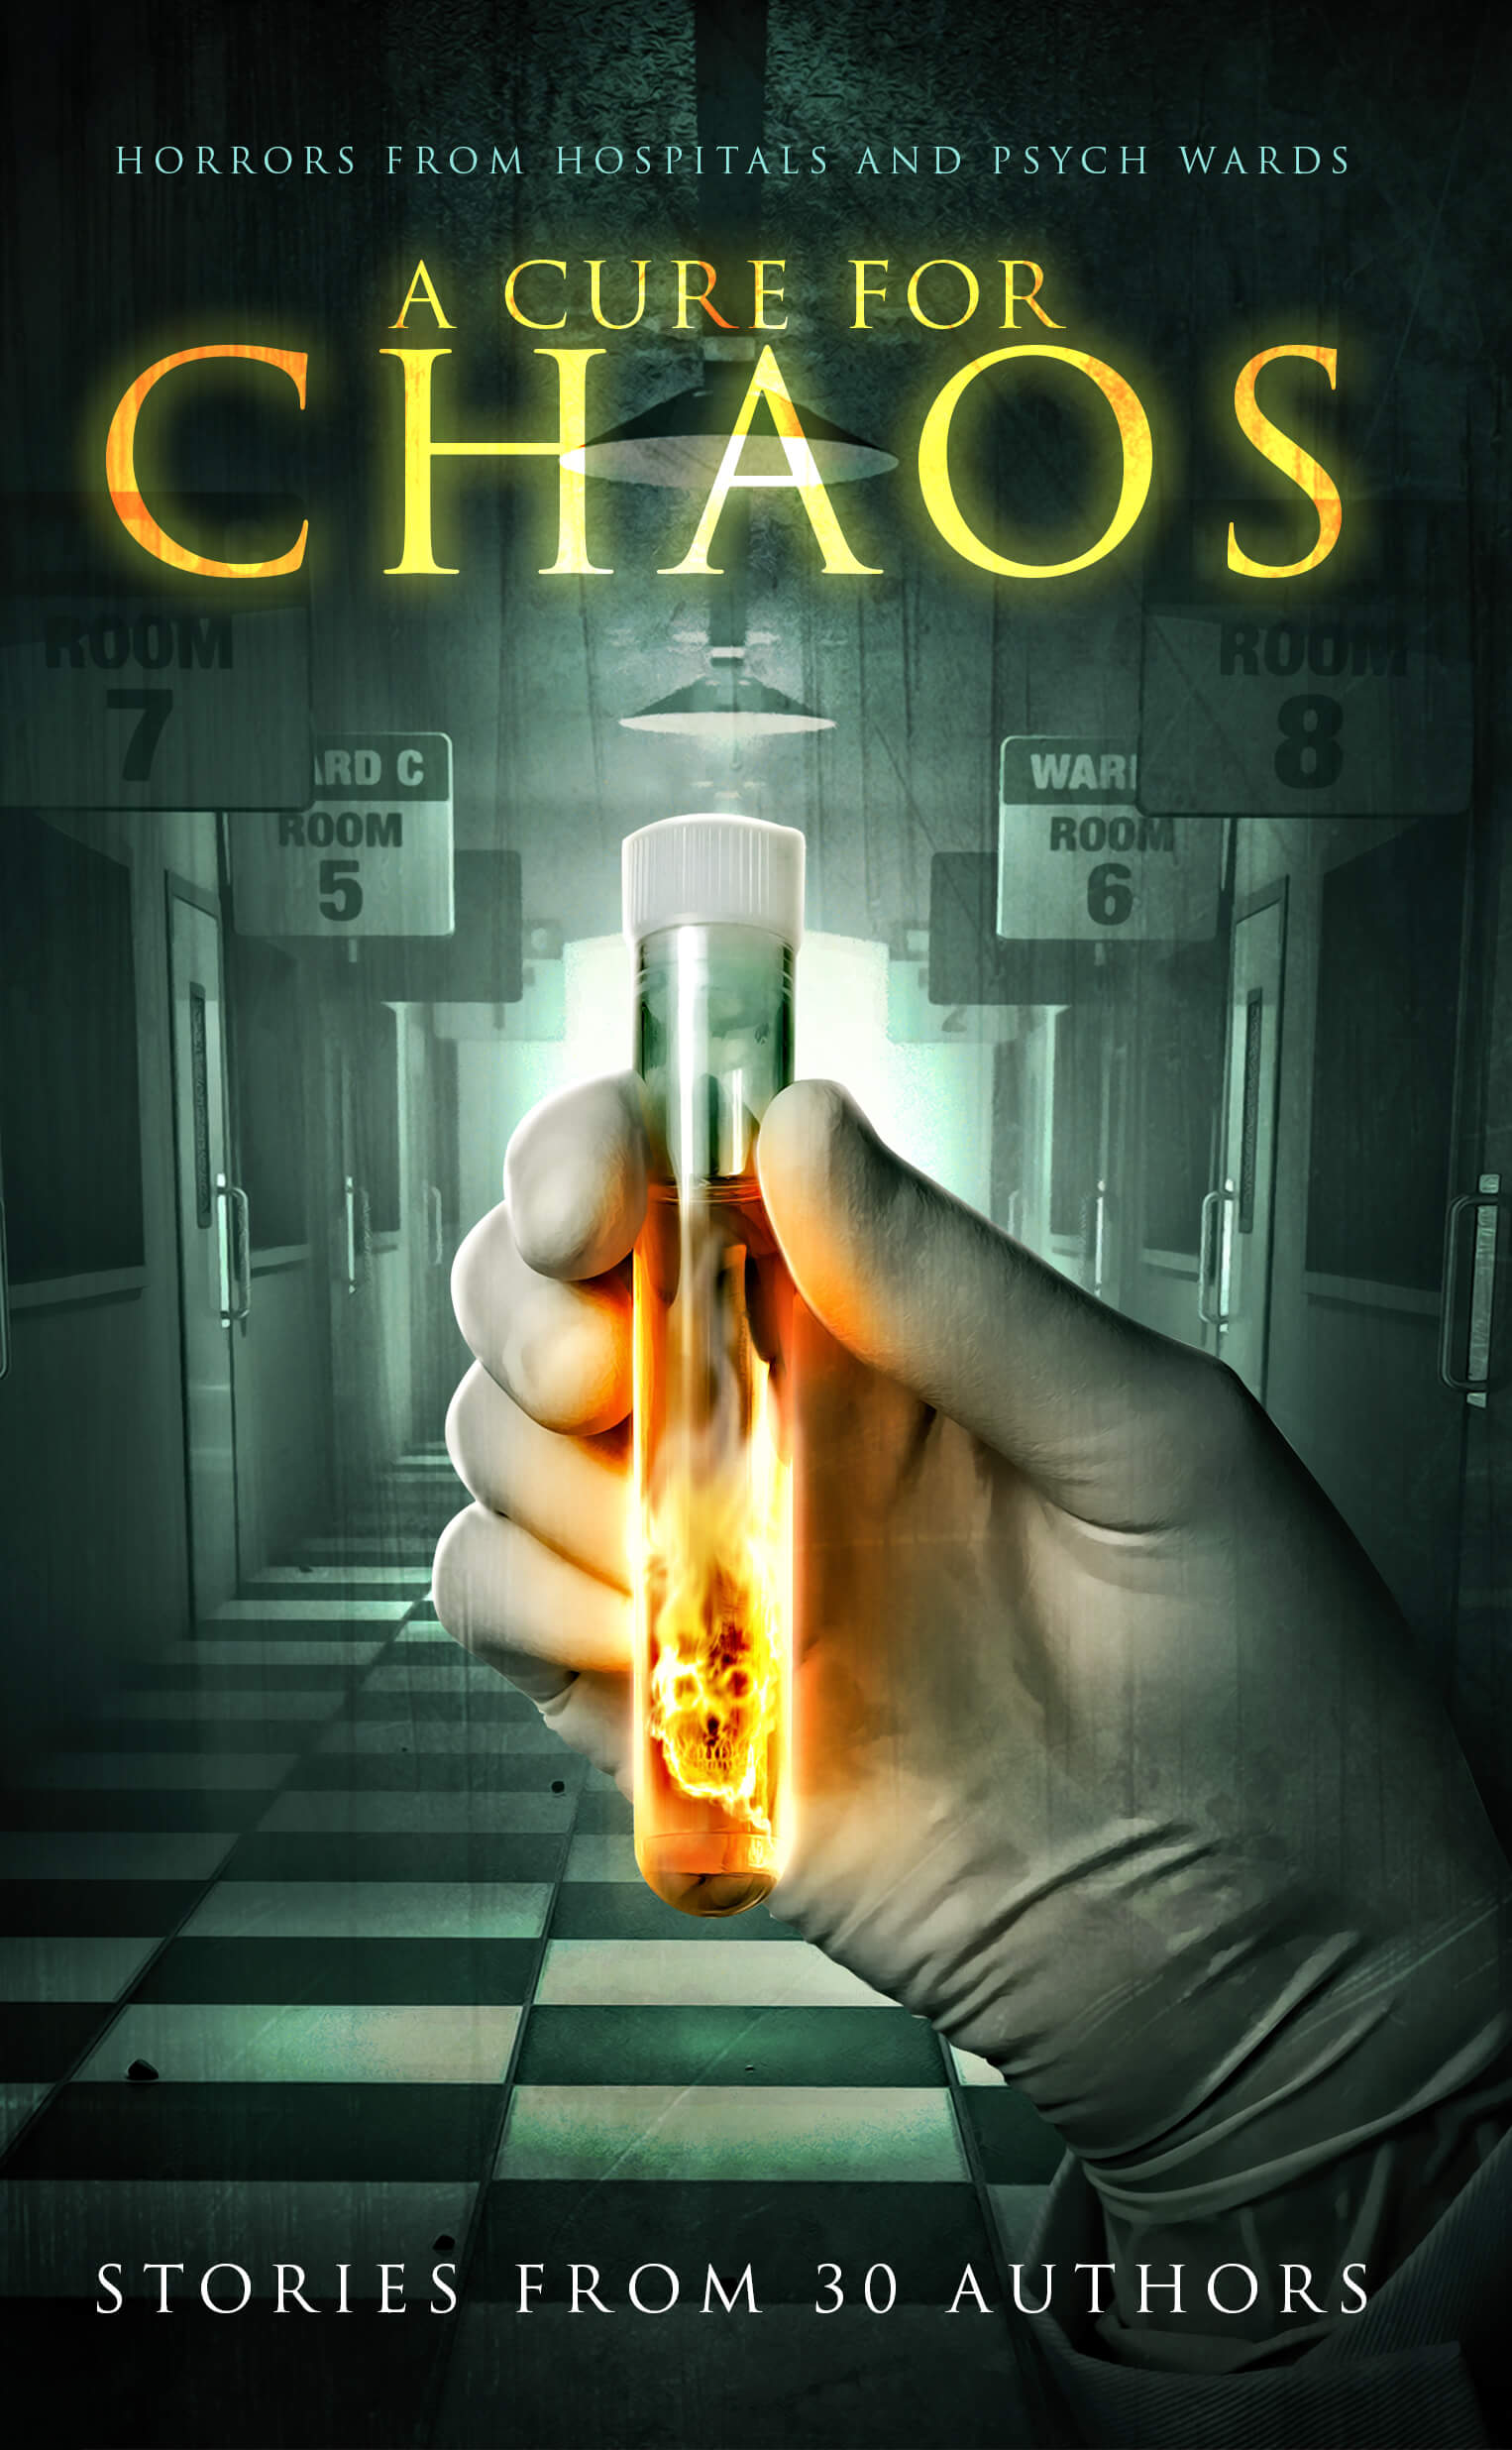 A Cure For Chaos Short Horror Stories